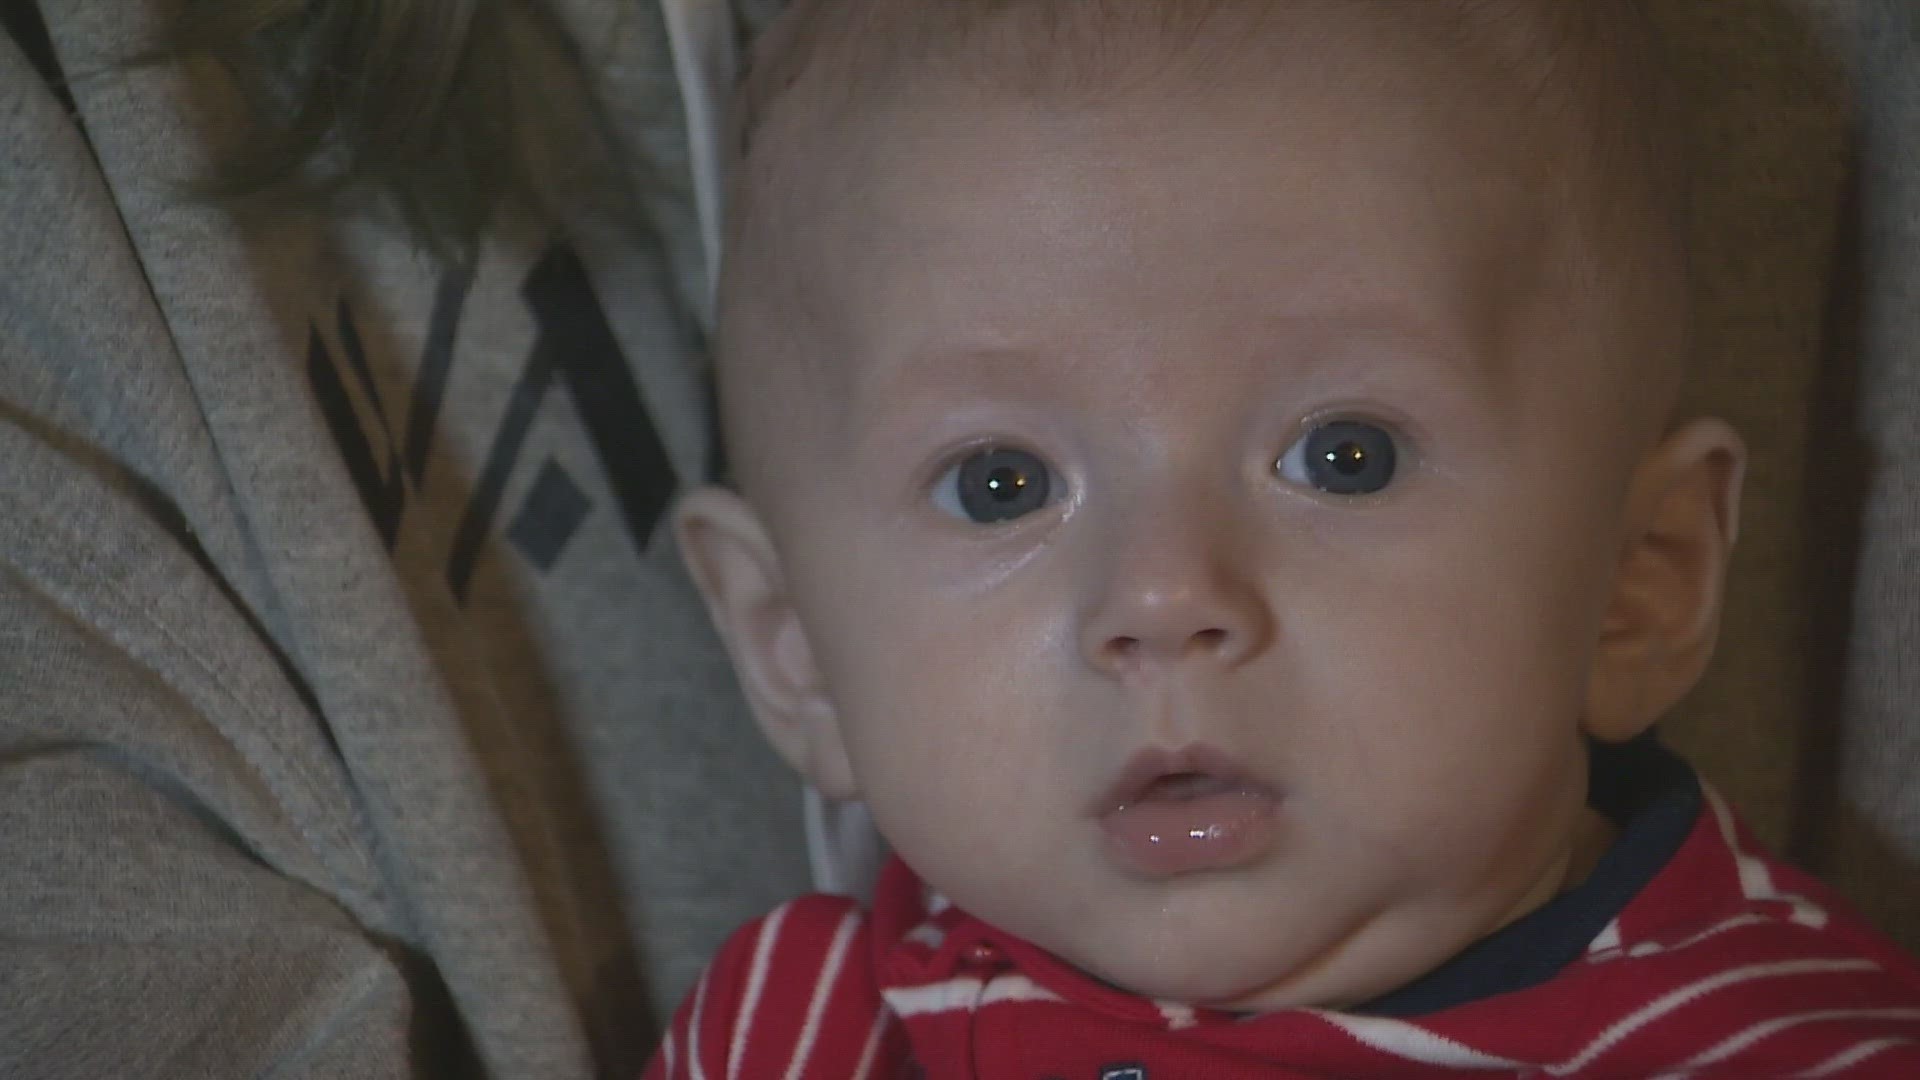 A three-month-old grazed with a stray bullet in the head and arm last week is back home recovering.